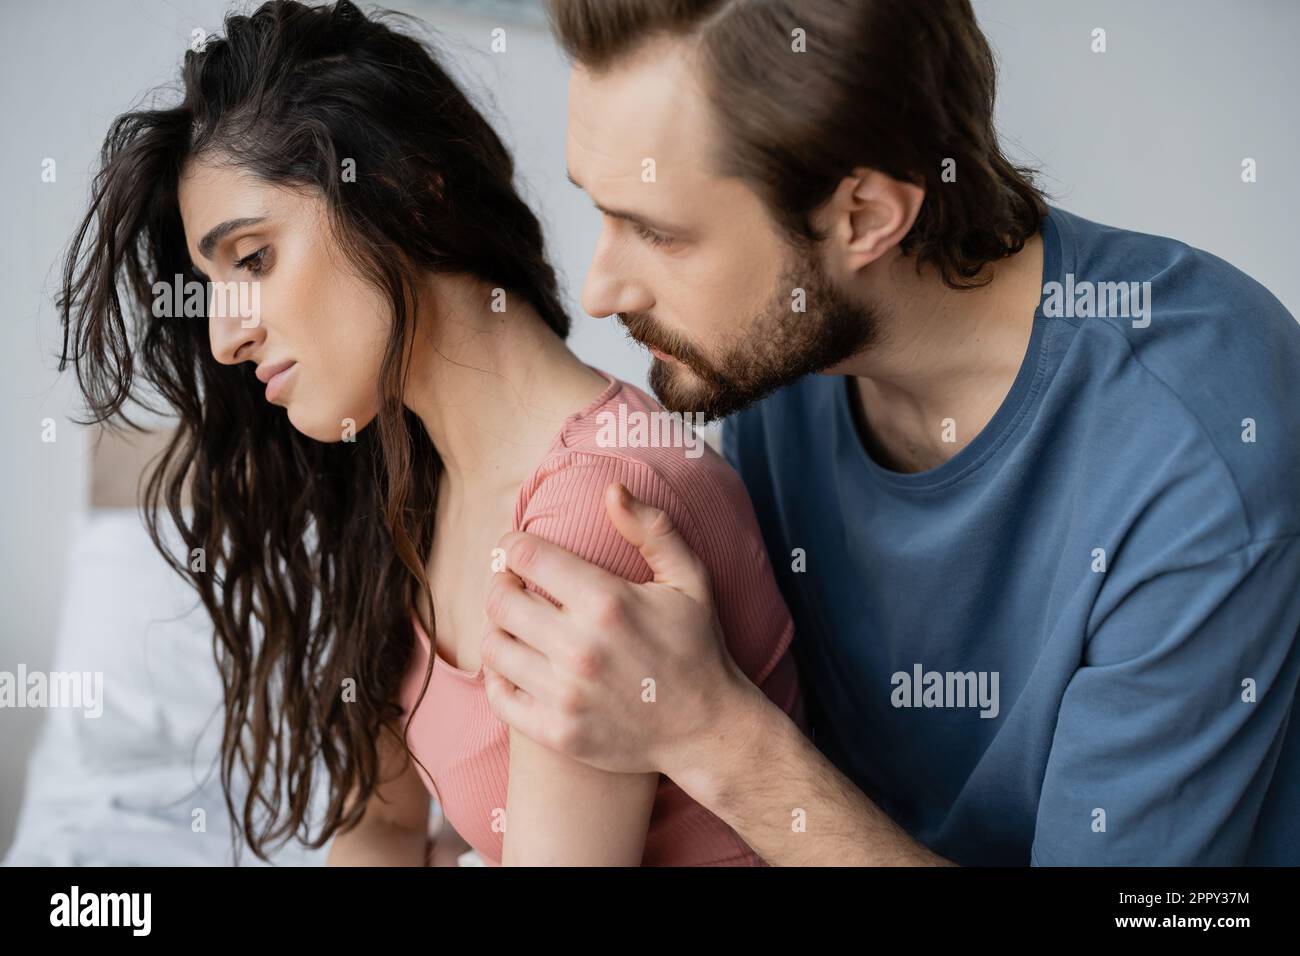 Caring bearded man calming down displeased girlfriend in bedroom at home,stock image Stock Photo